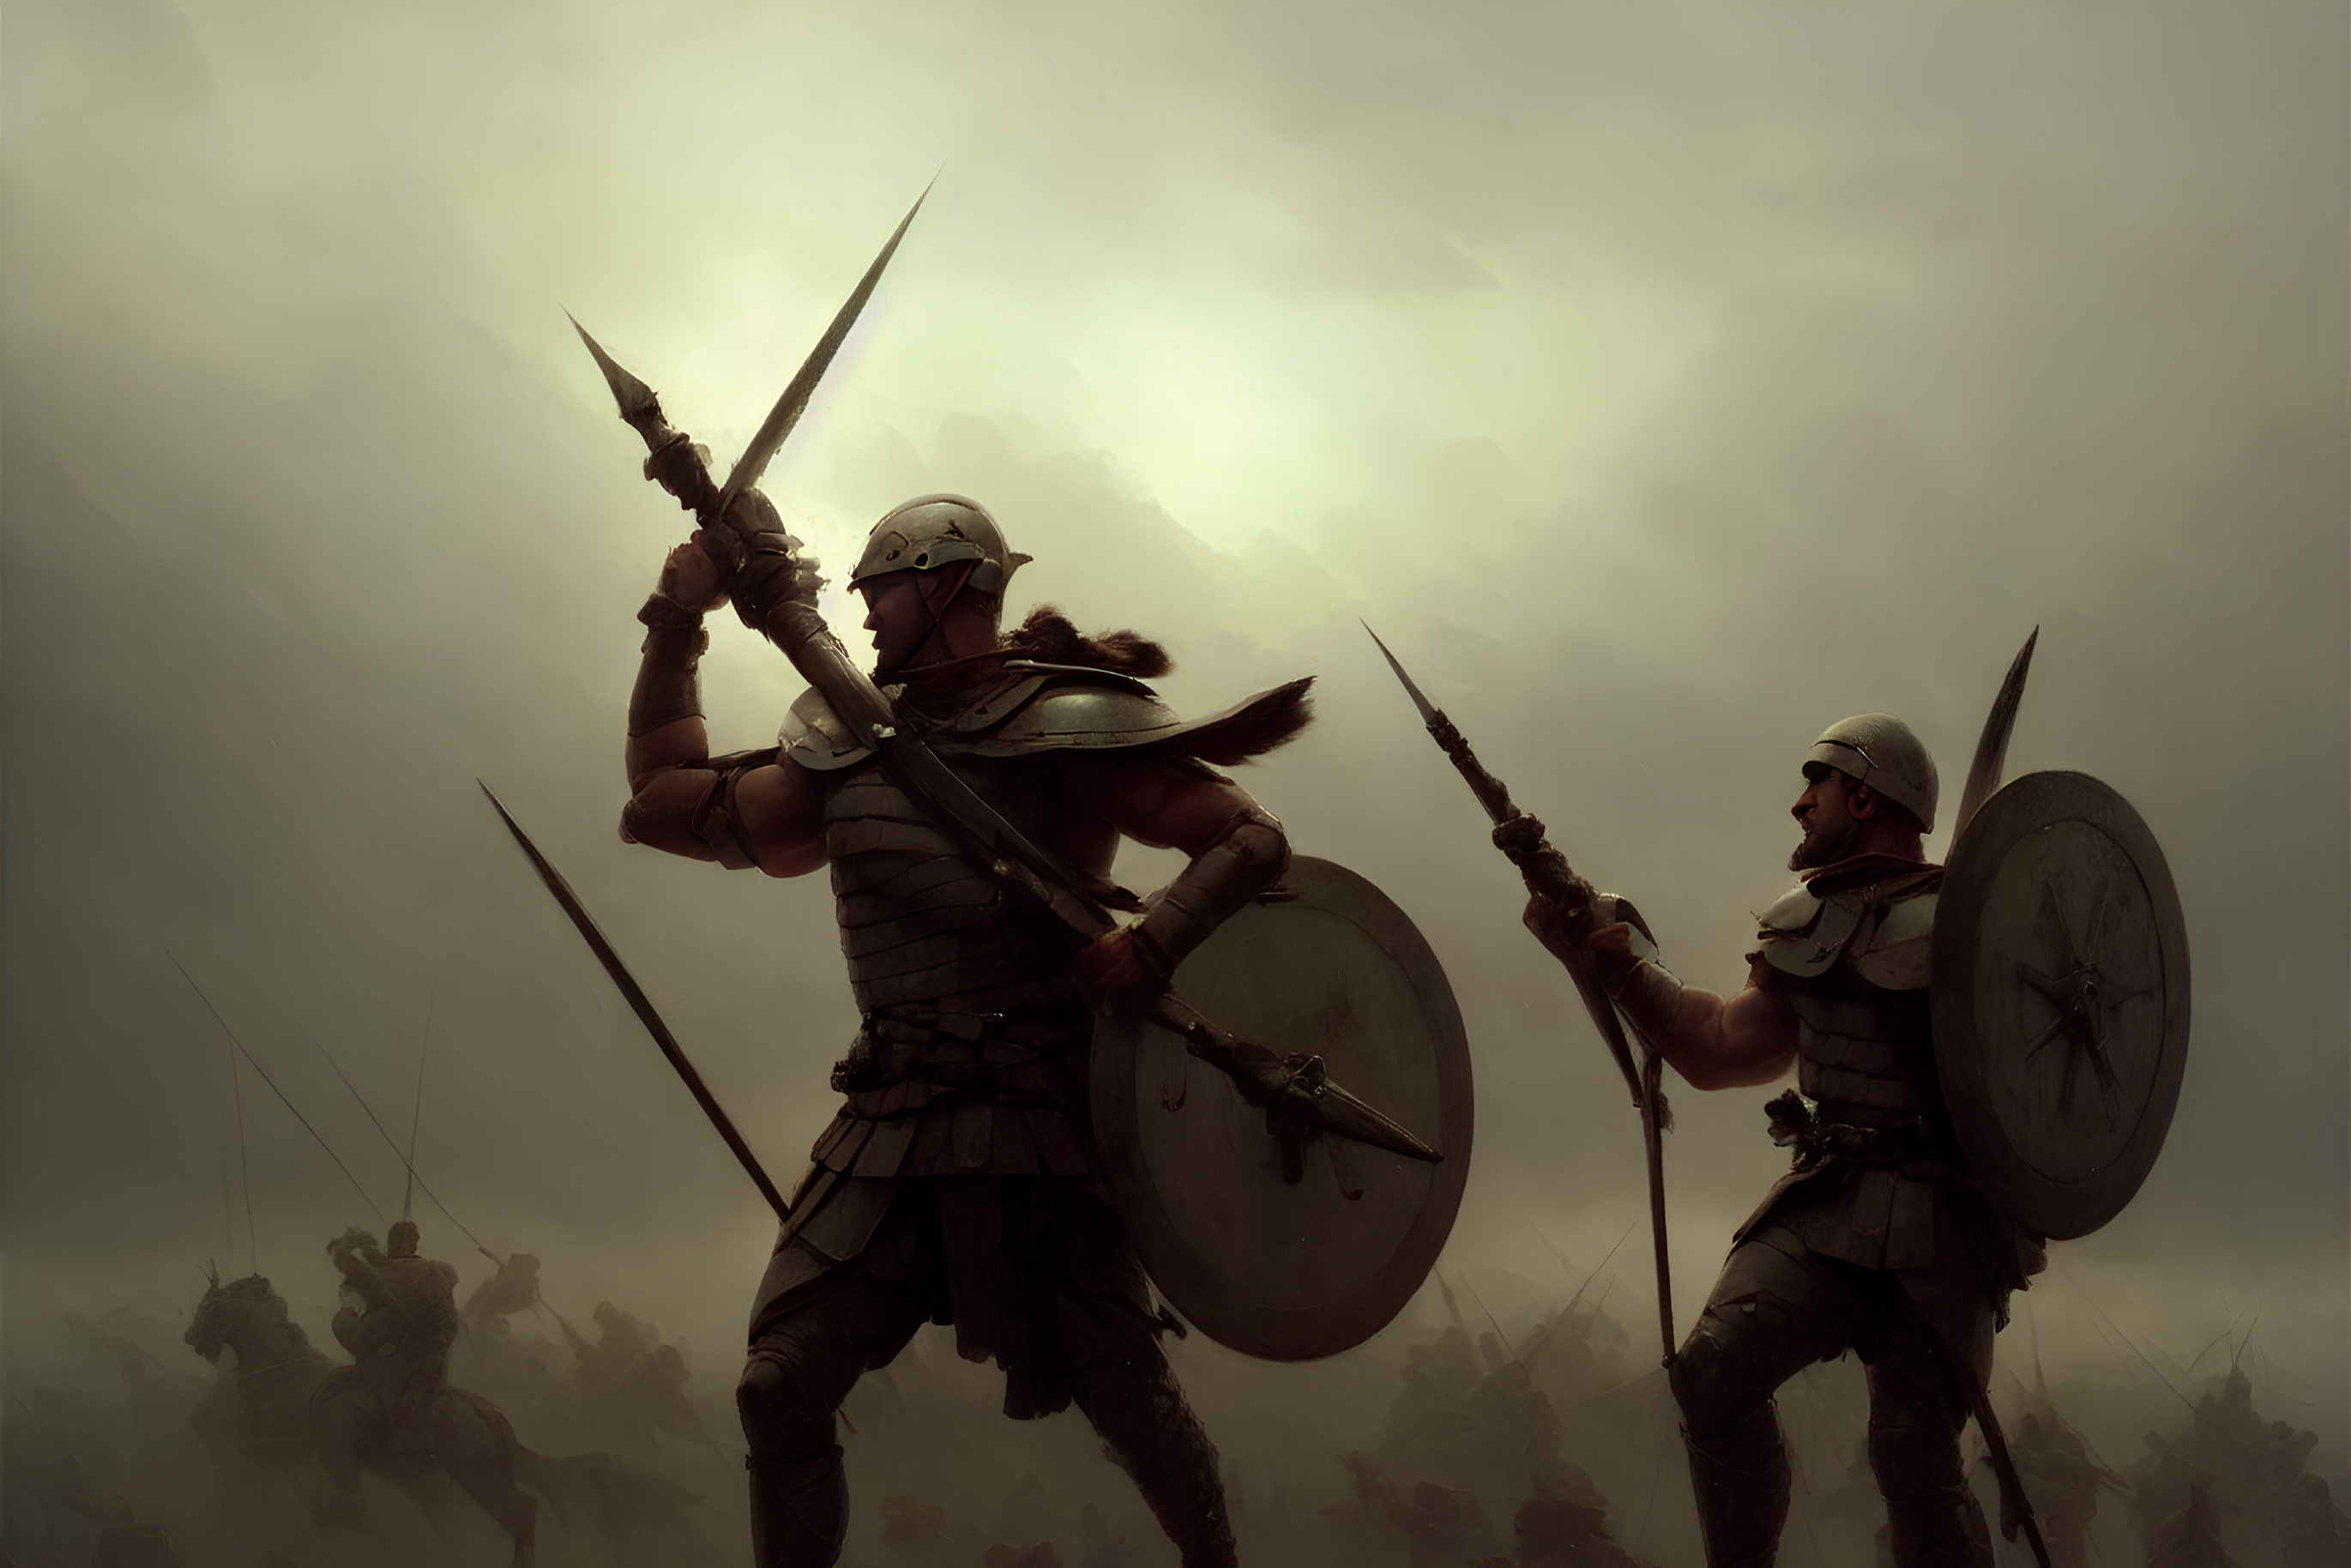 Ancient warriors in helmets and armor with spears and shields under cloudy sky